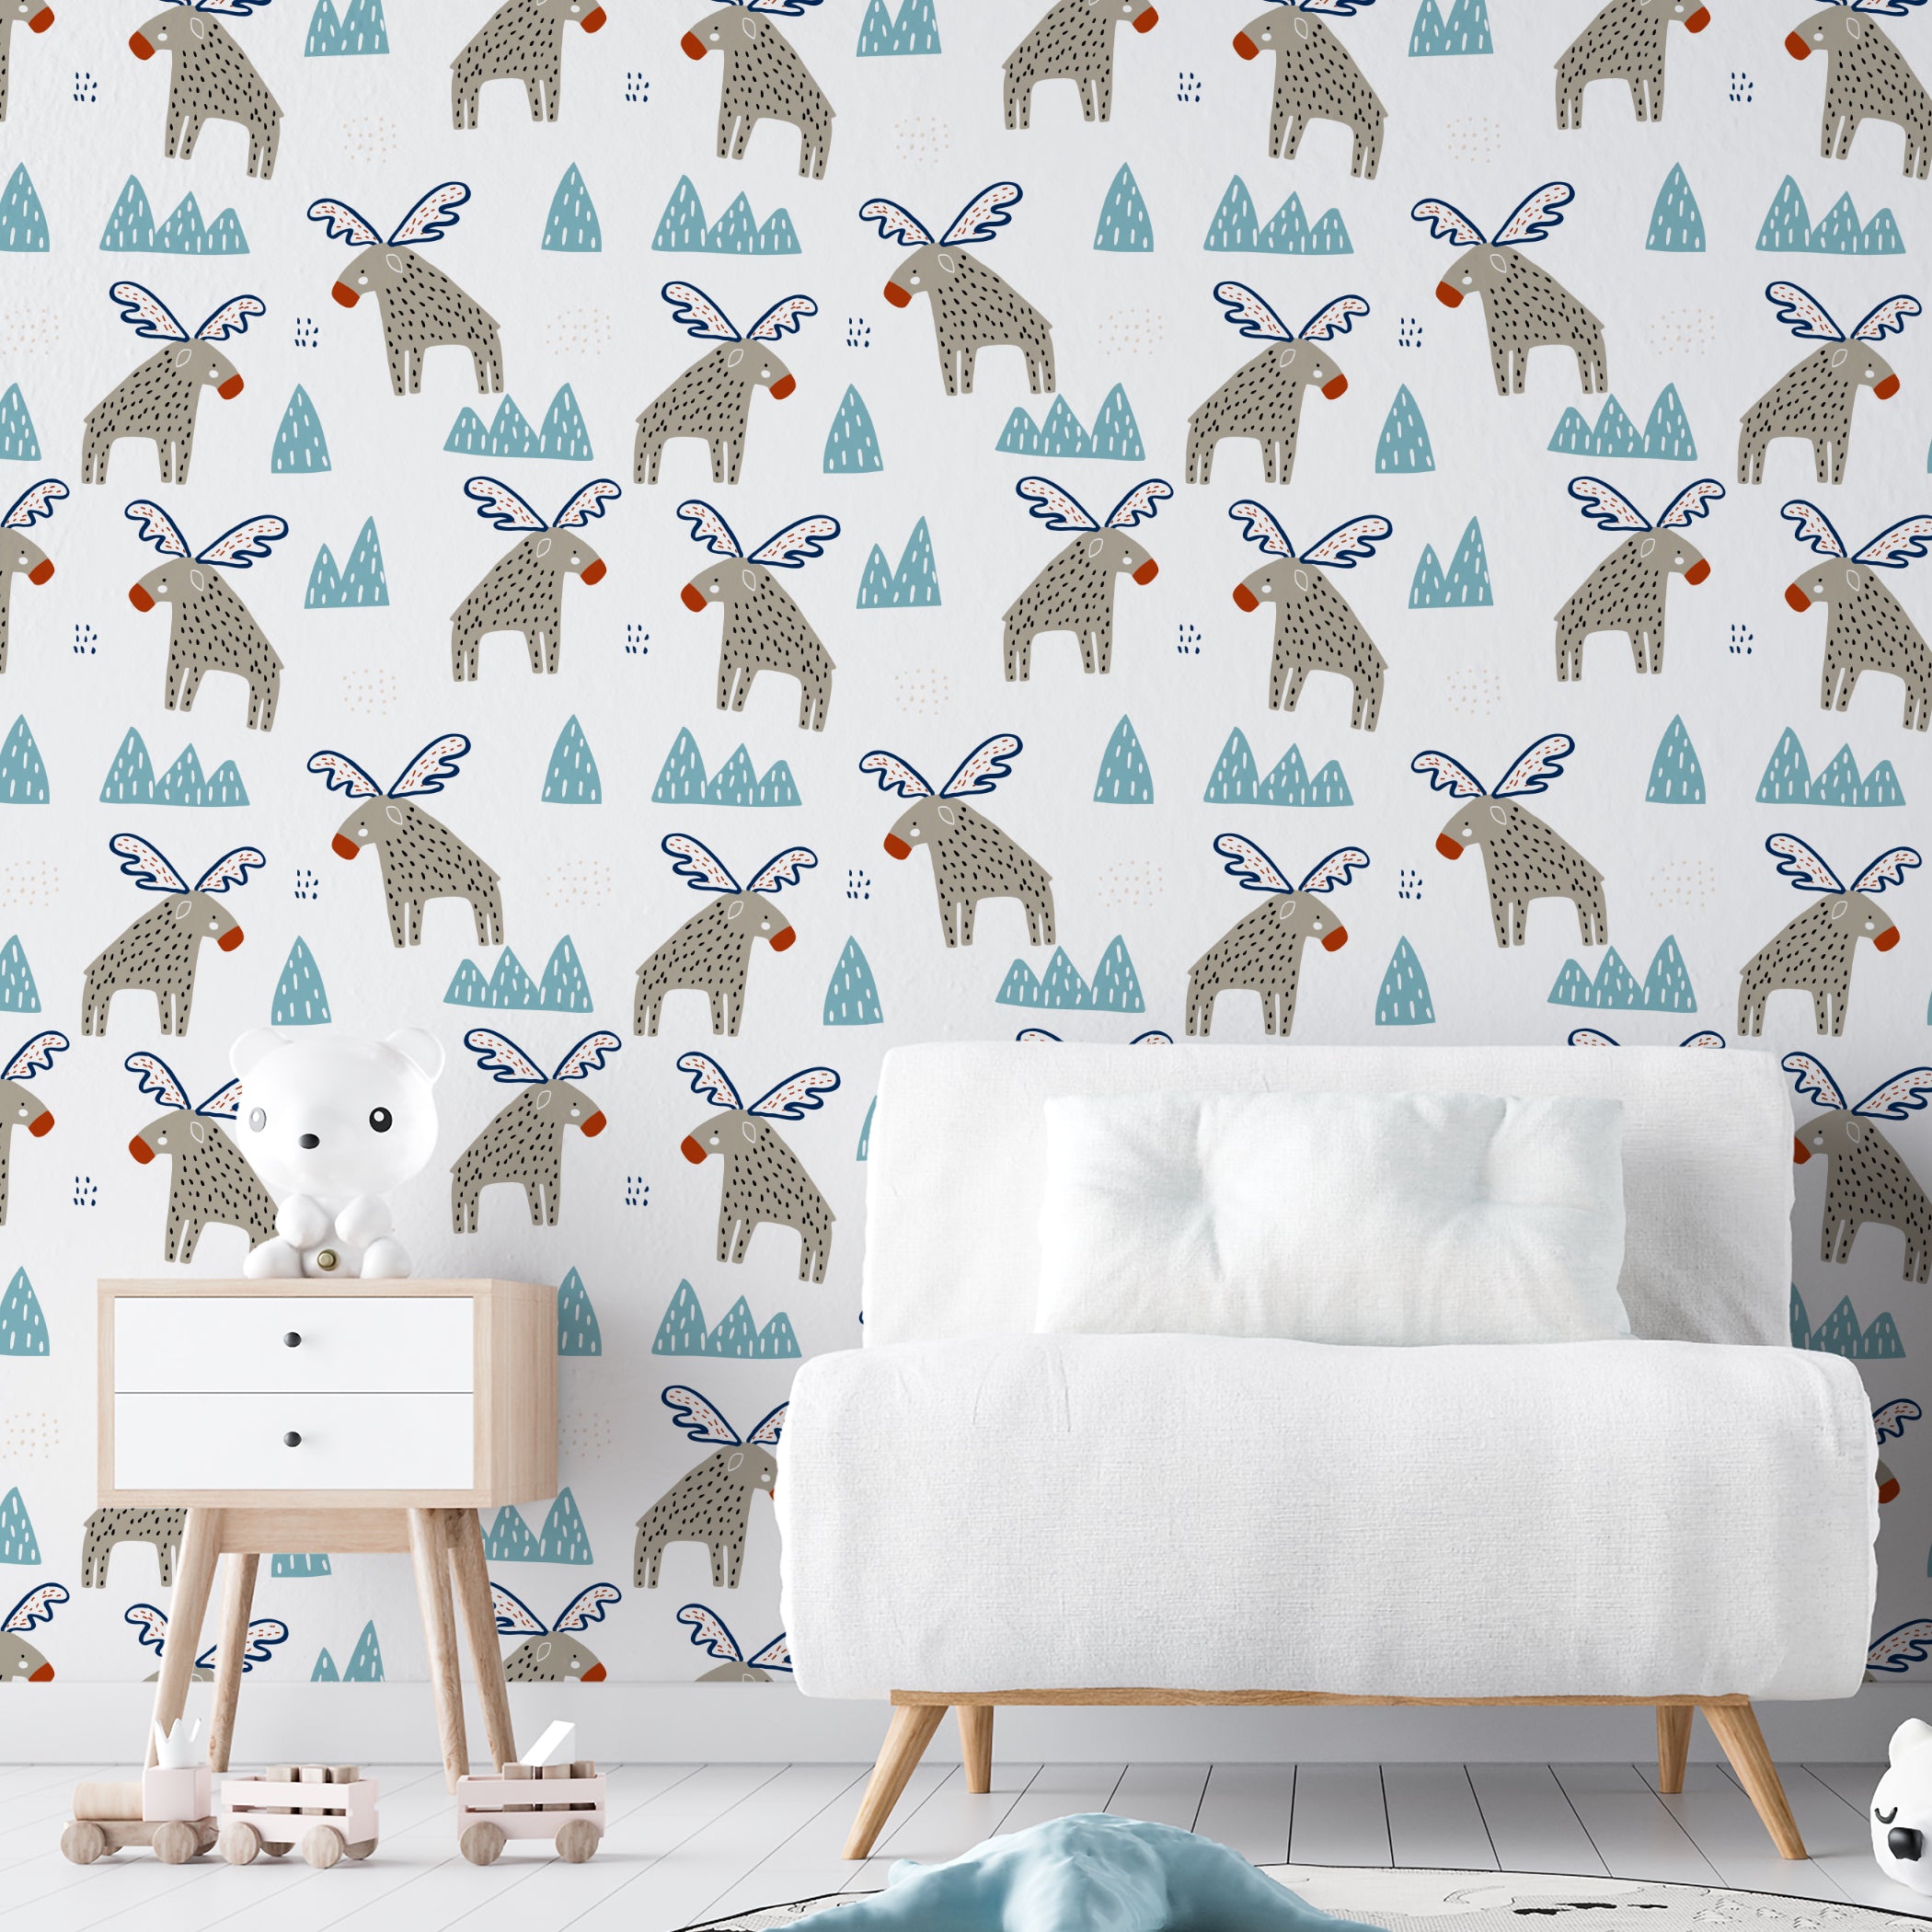 A child's room decorated with "Nordic Moose Wallpaper II" showcasing playful winged moose in a fantastical setting. The room includes modern children’s furniture such as a small white couch, a polar bear toy, and a simplistic yet stylish decor that complements the lively wallpaper.